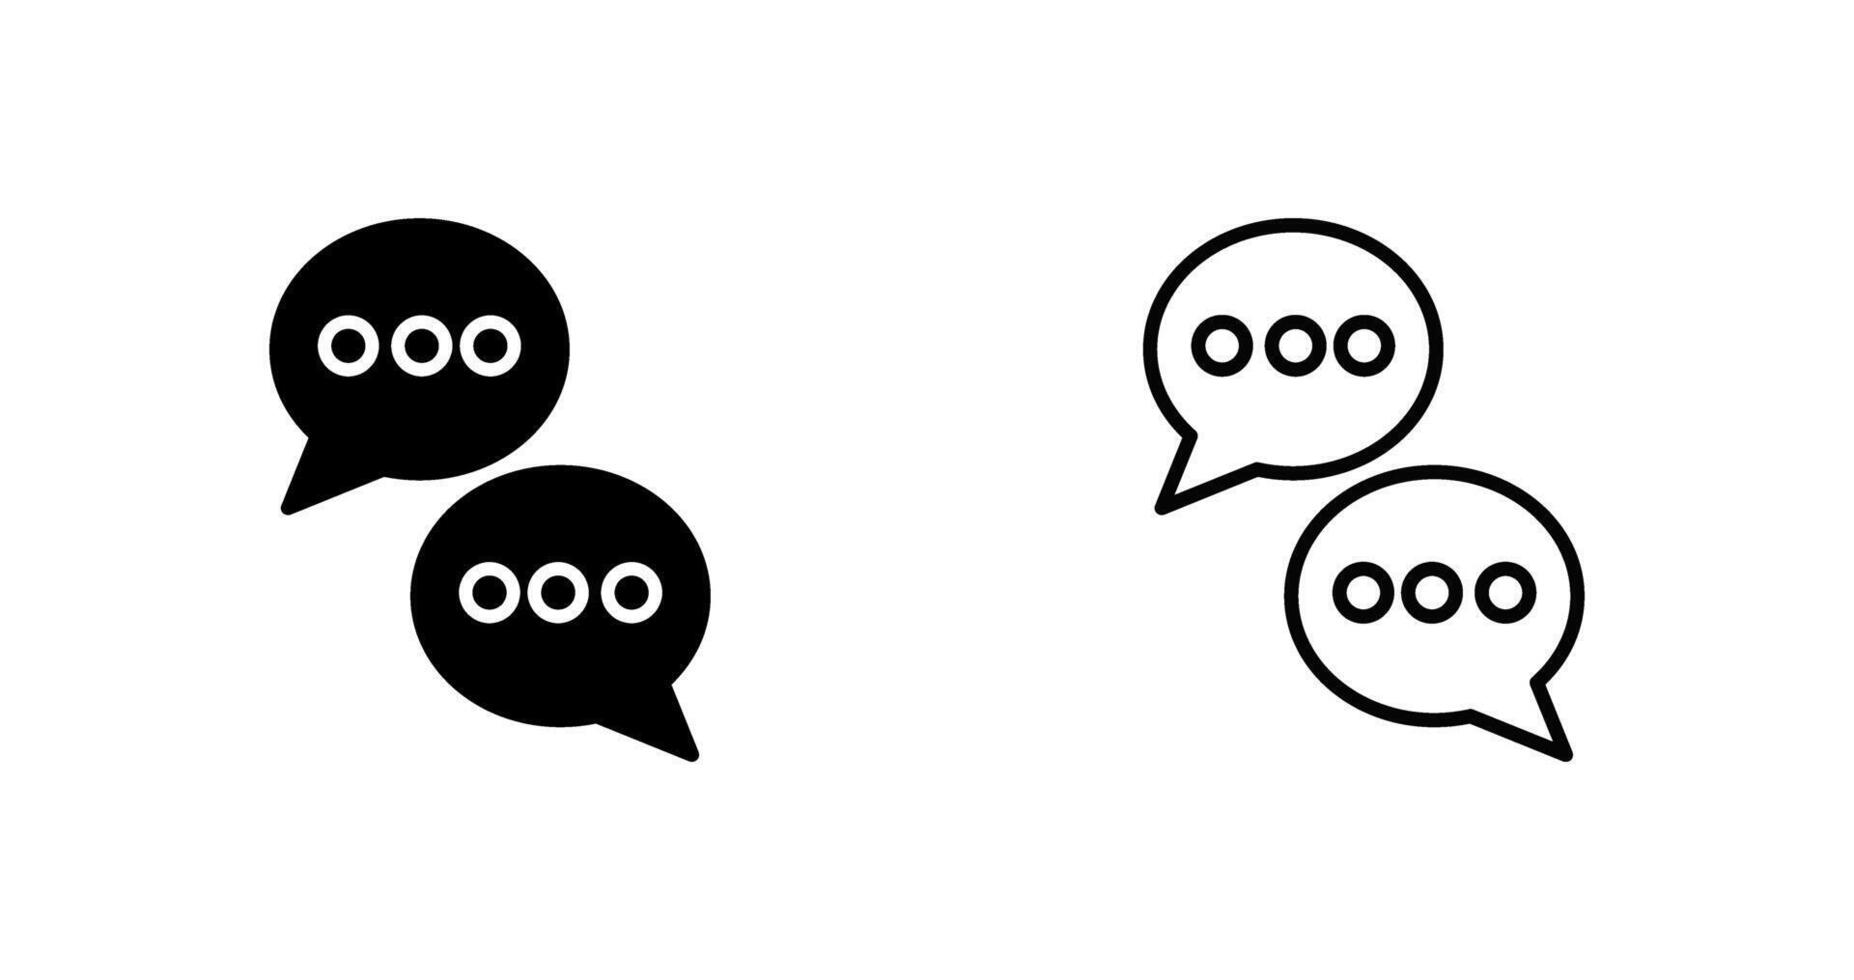 Chat Conversation Vector Icon